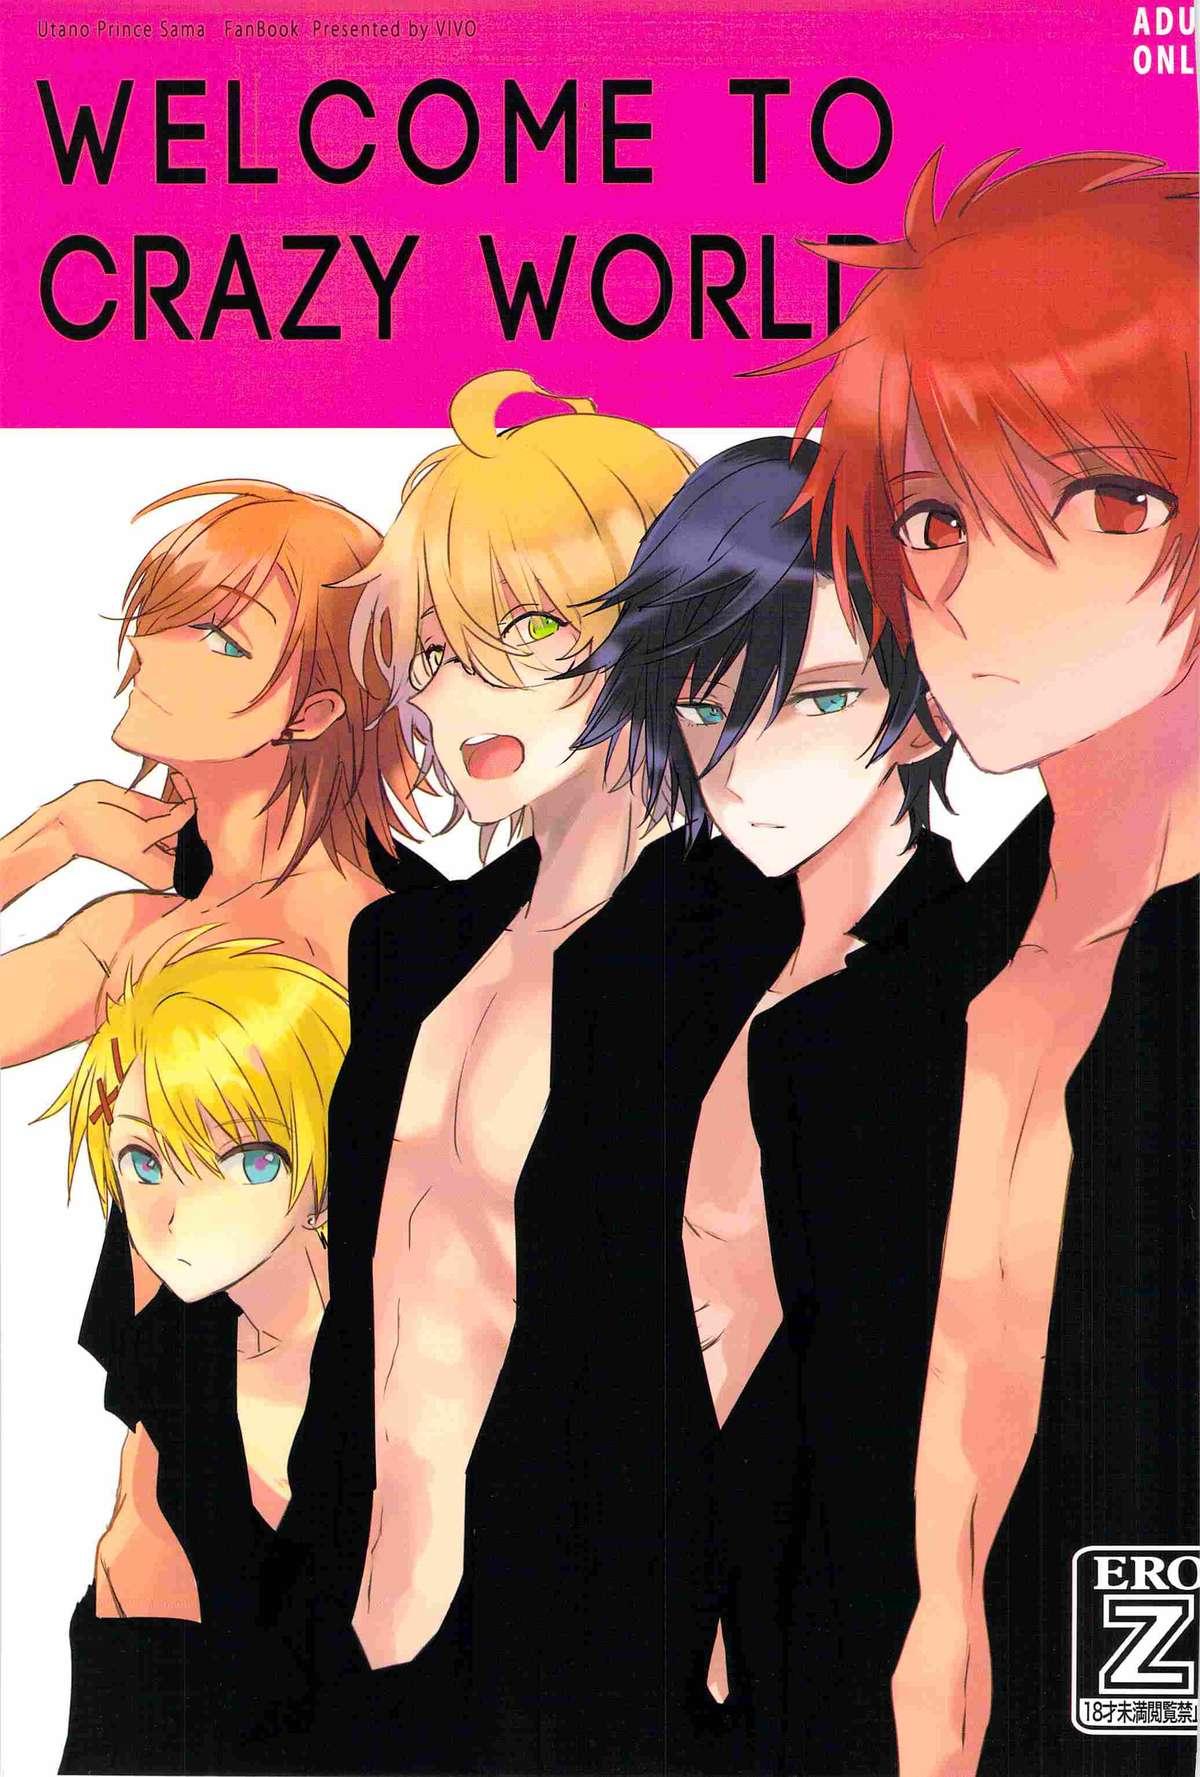 WELCOME TO CRAZY WORLD 0